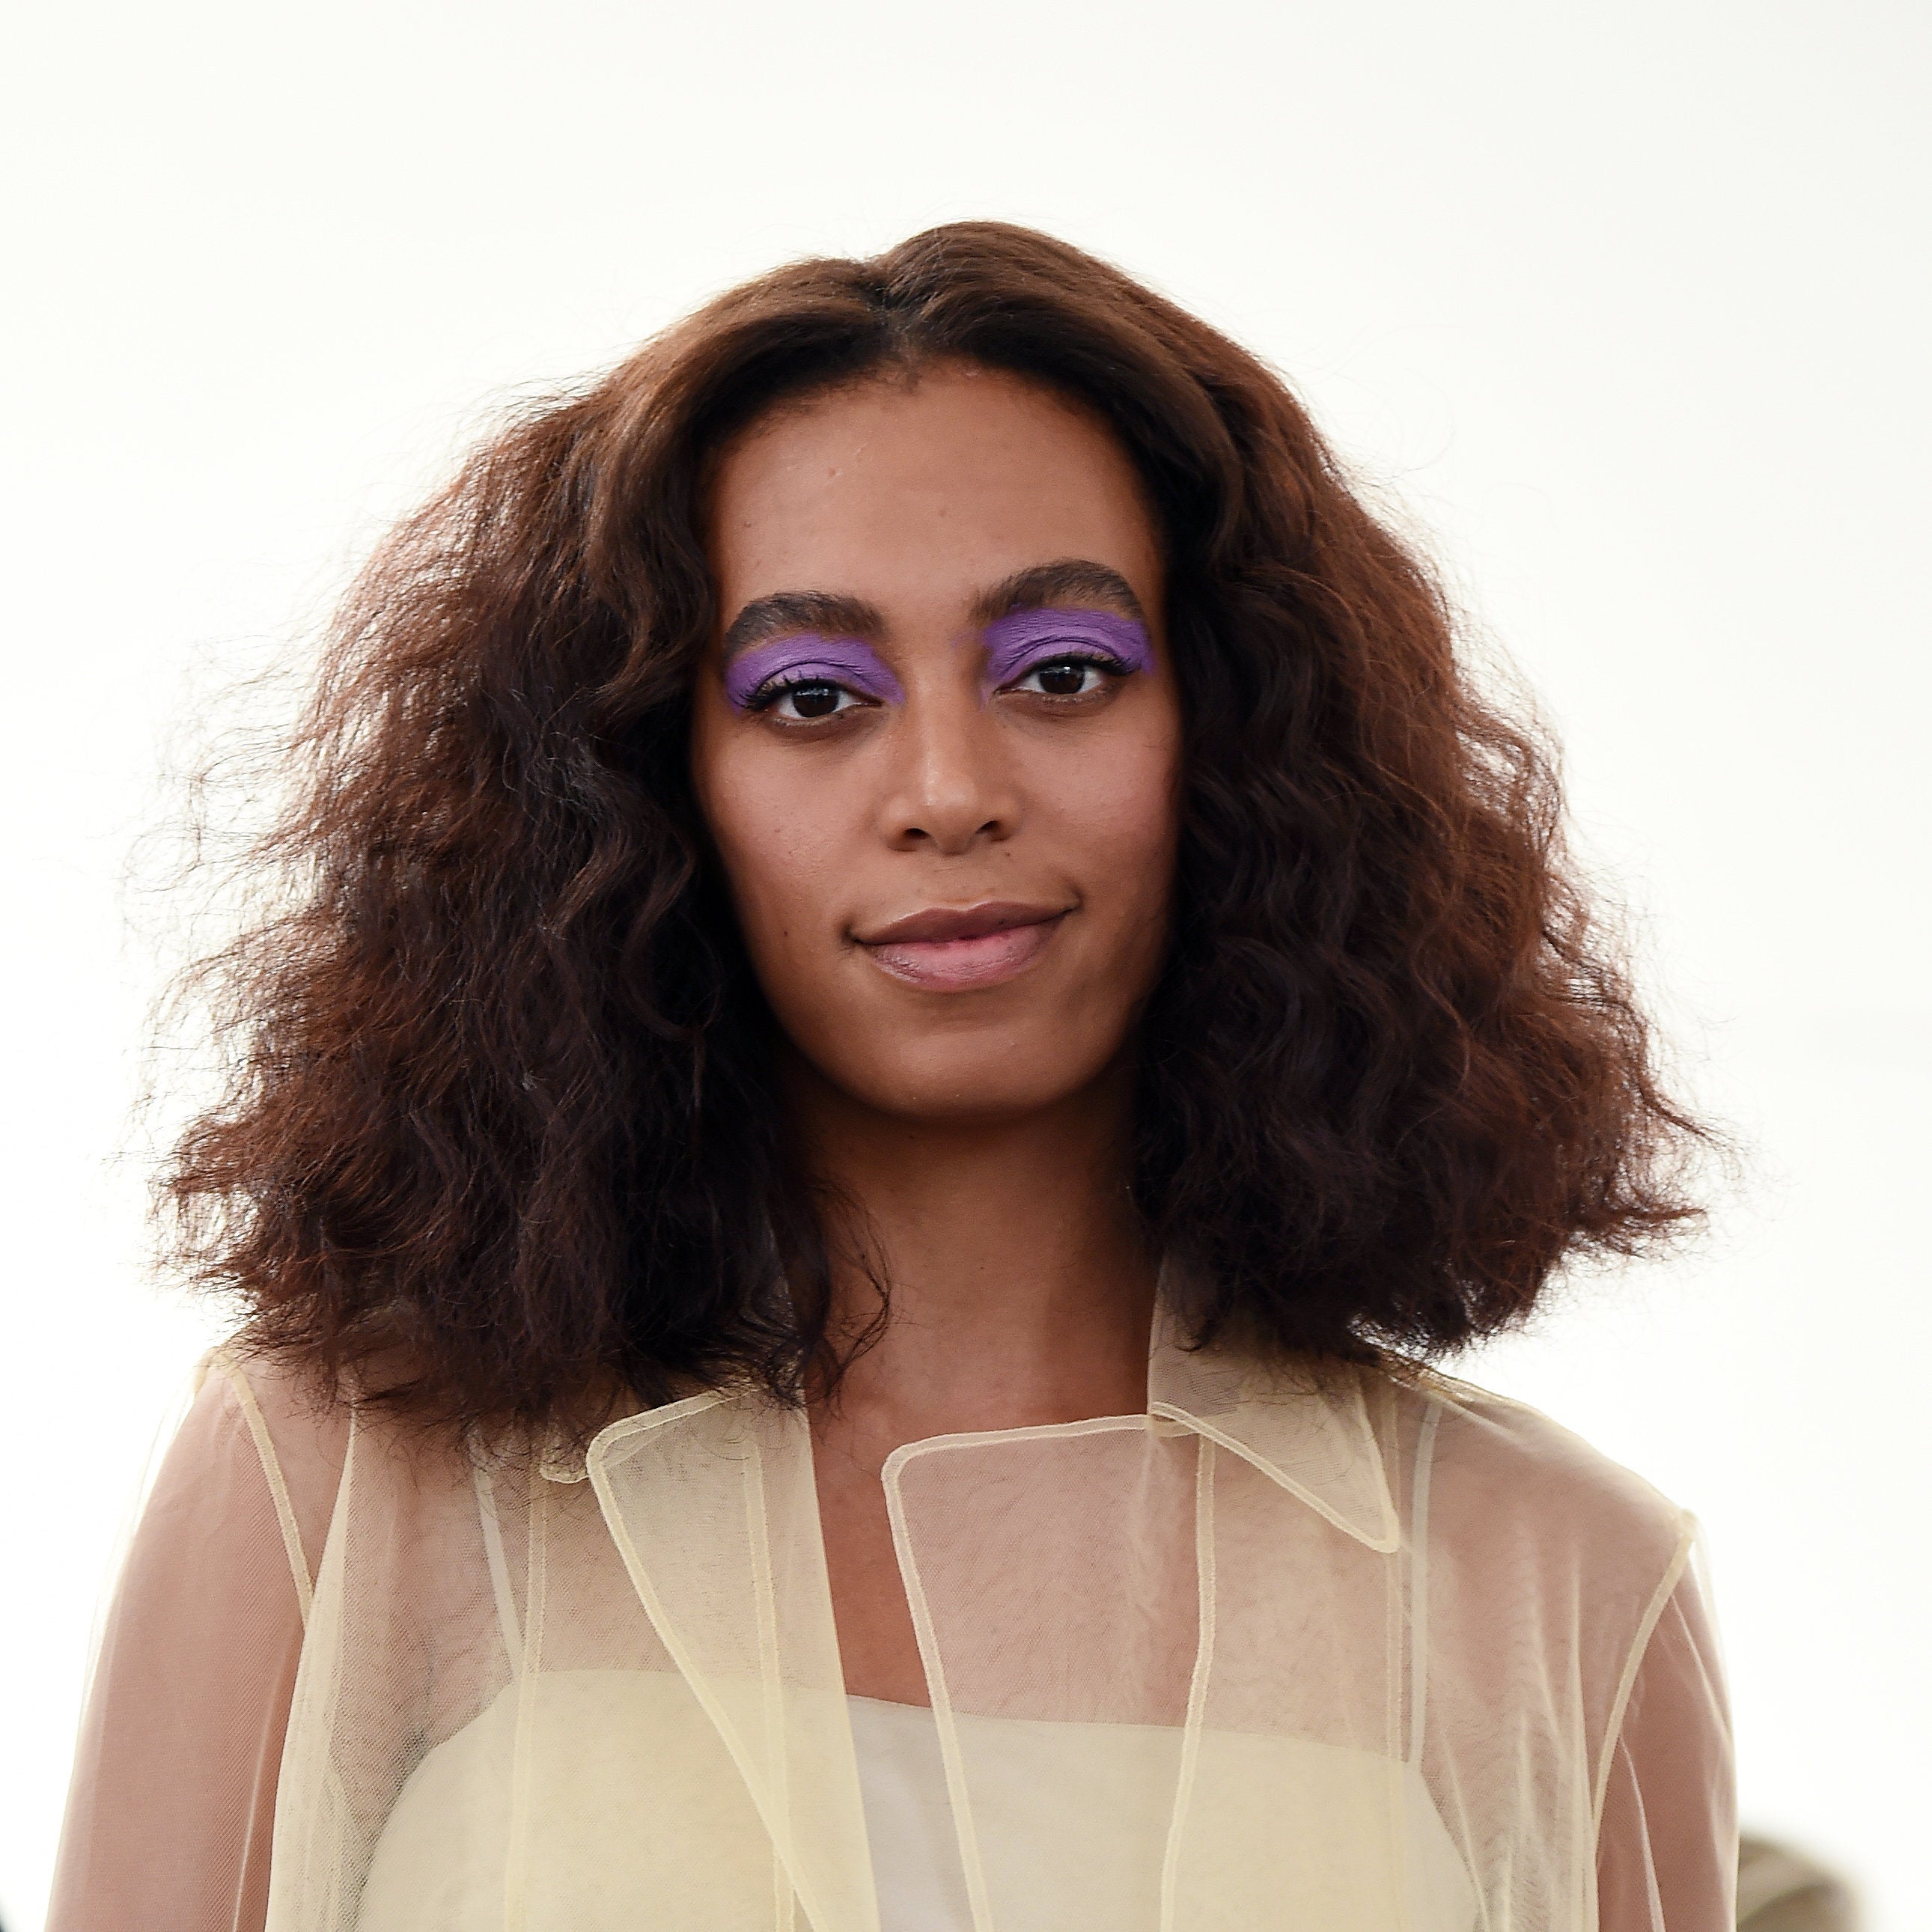 Solange Recalls Troubling Conversation Between Two White Men That Inspired 'A Seat At The Table'
